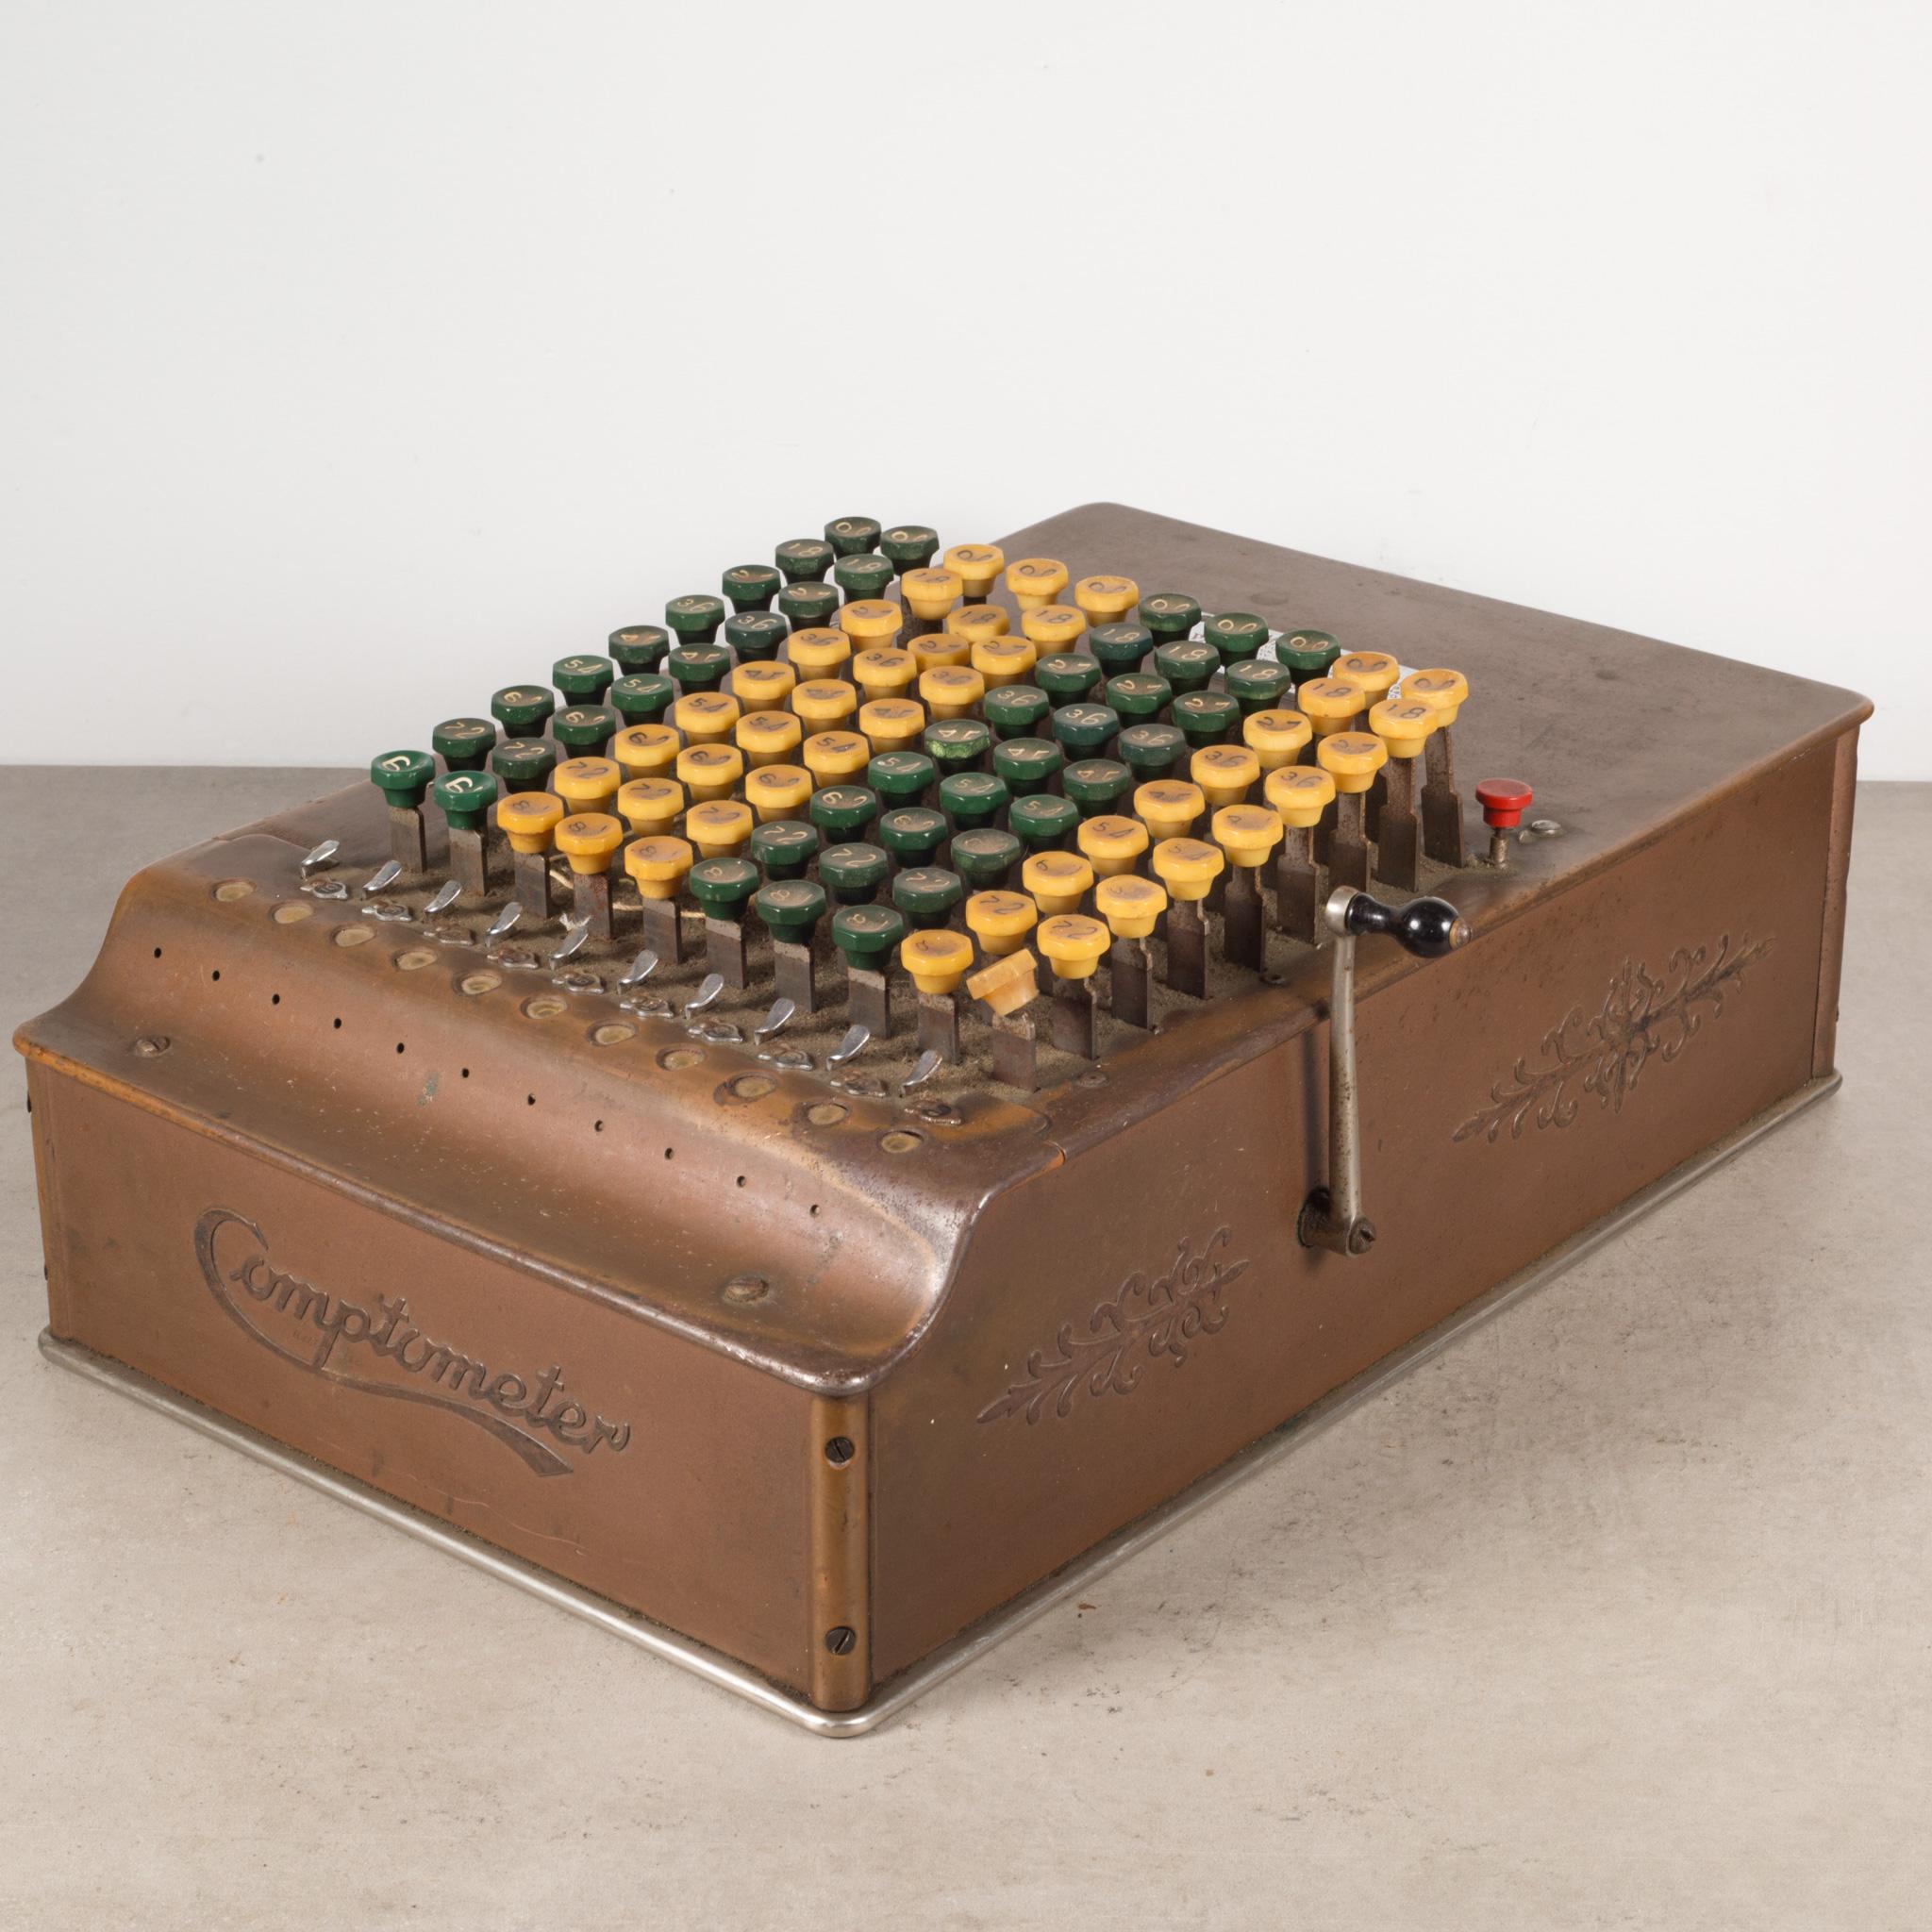 20th Century Early 19th-Early 20th C. Copper Adding Machine C.1887-1920  (FREE SHIPPING) For Sale